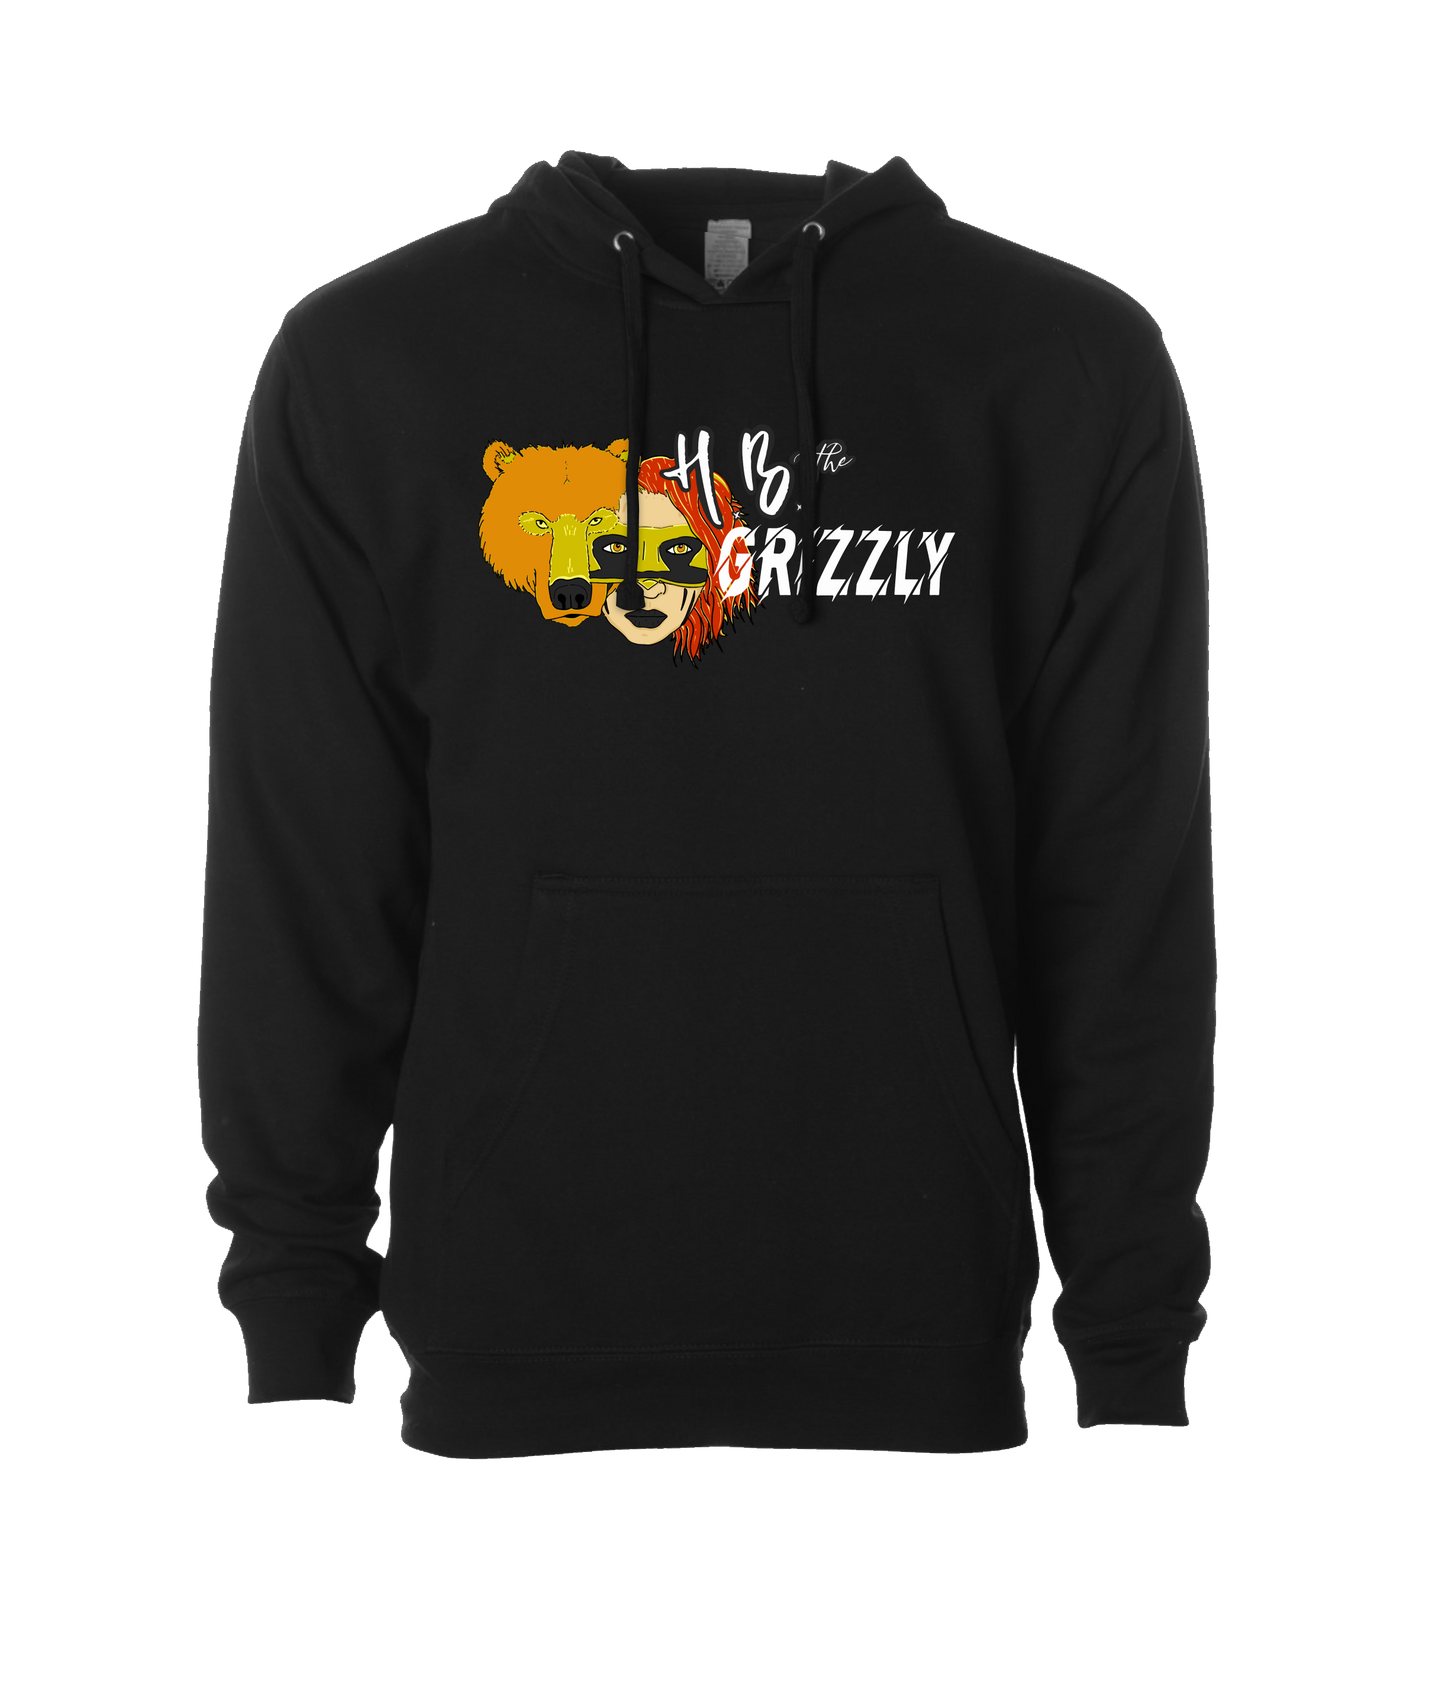 HB The Grizzly - HB&G - Black Hoodie